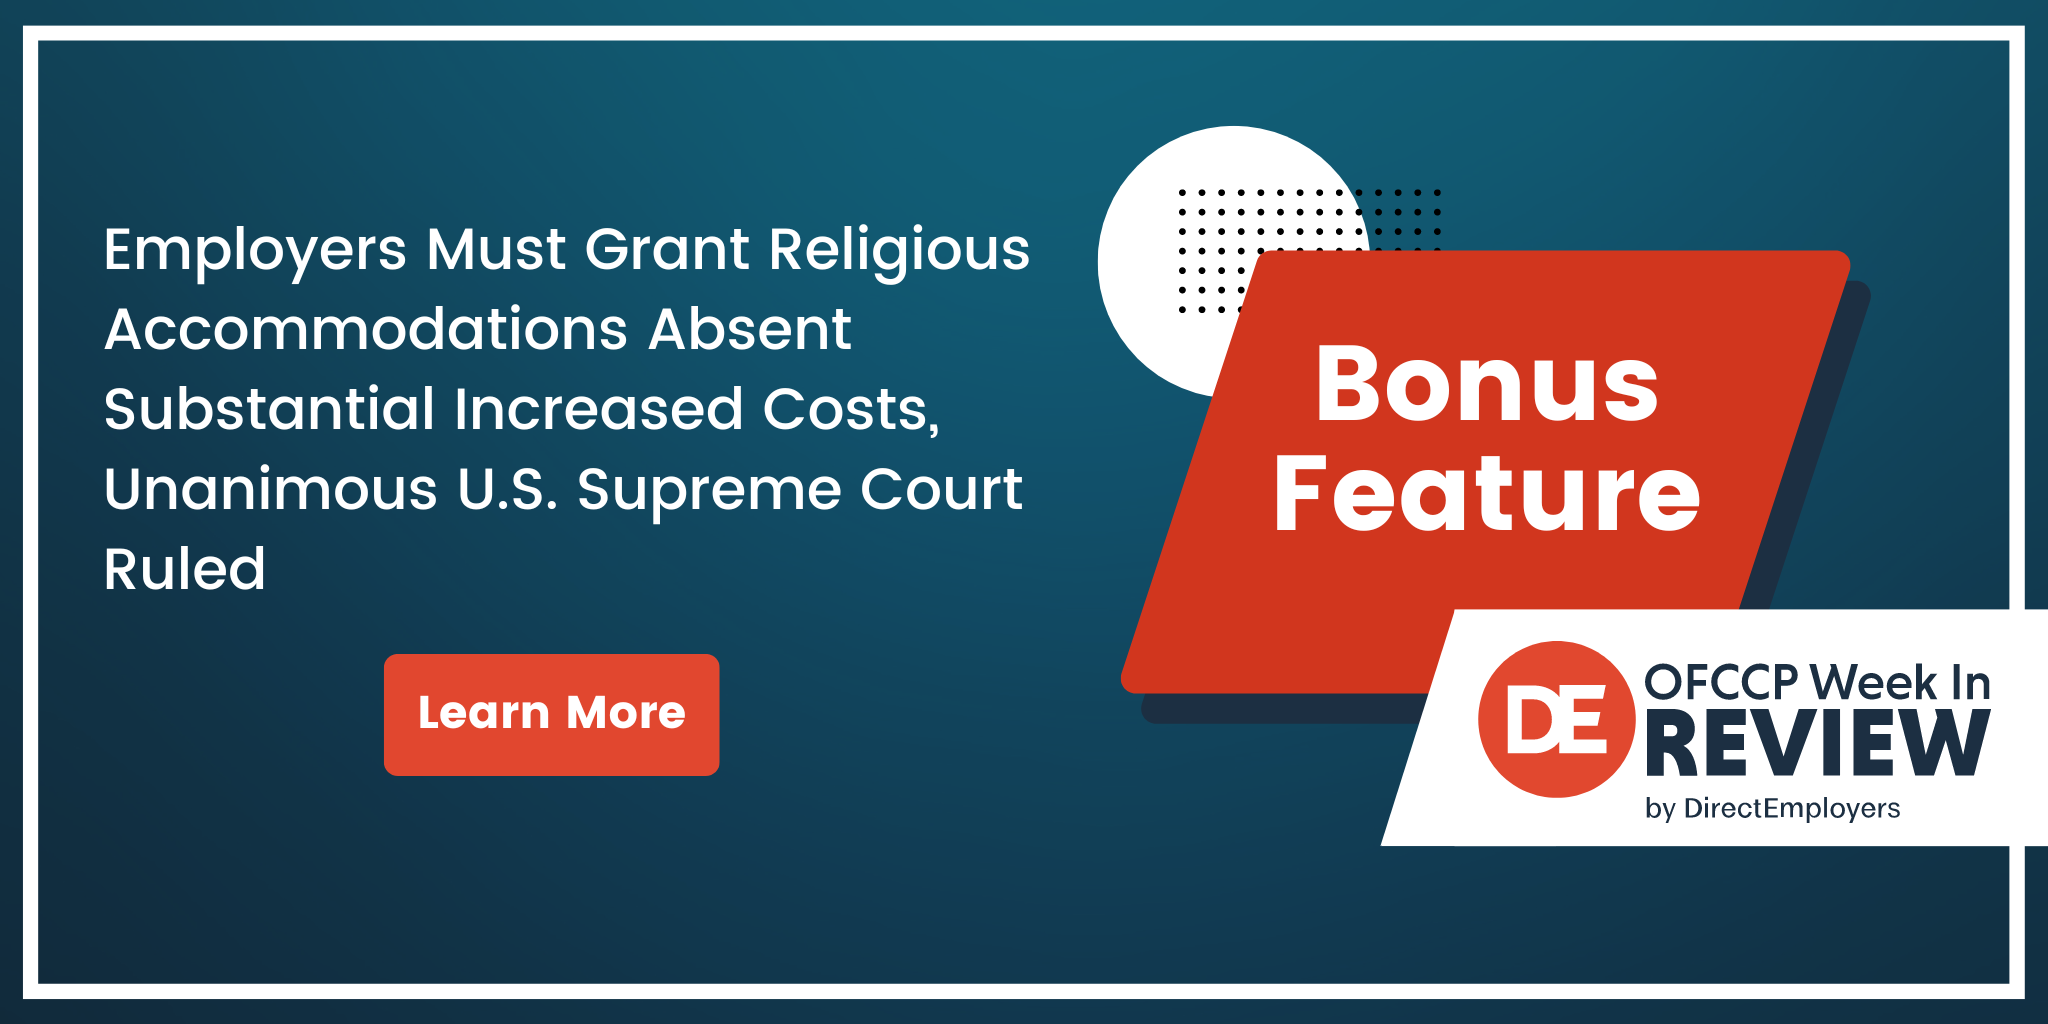 OFCCP Week In Review, Bonus Feature | Employers Must Grant Religious Accommodations Absent Substantial Increased Costs, Unanimous U.S. Supreme Court Ruled